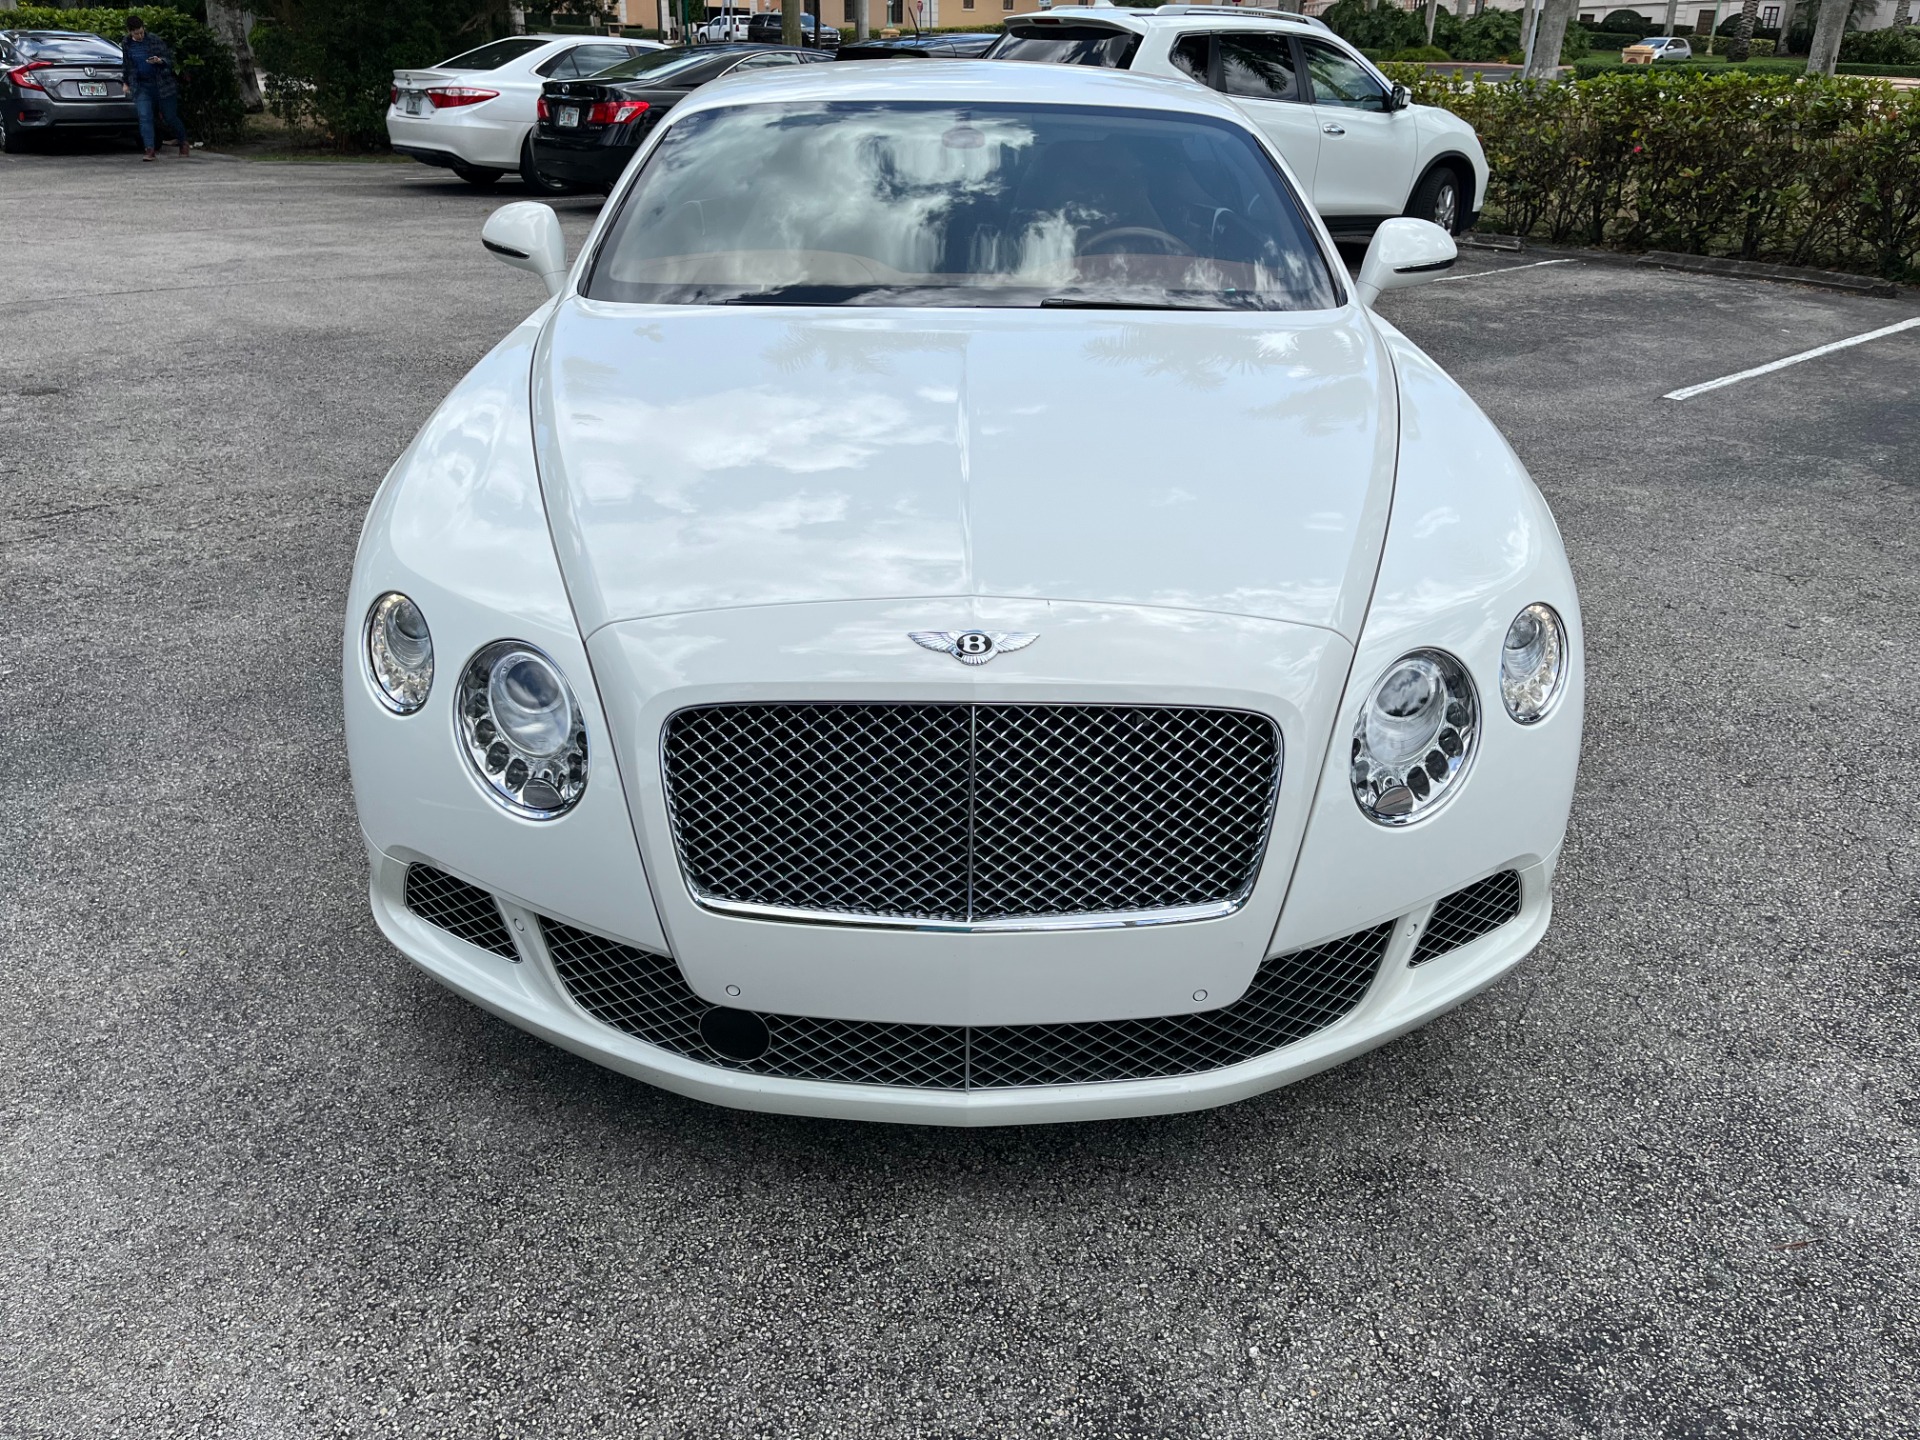 Used 2012 Bentley Continental GT for sale Sold at The Gables Sports Cars in Miami FL 33146 3